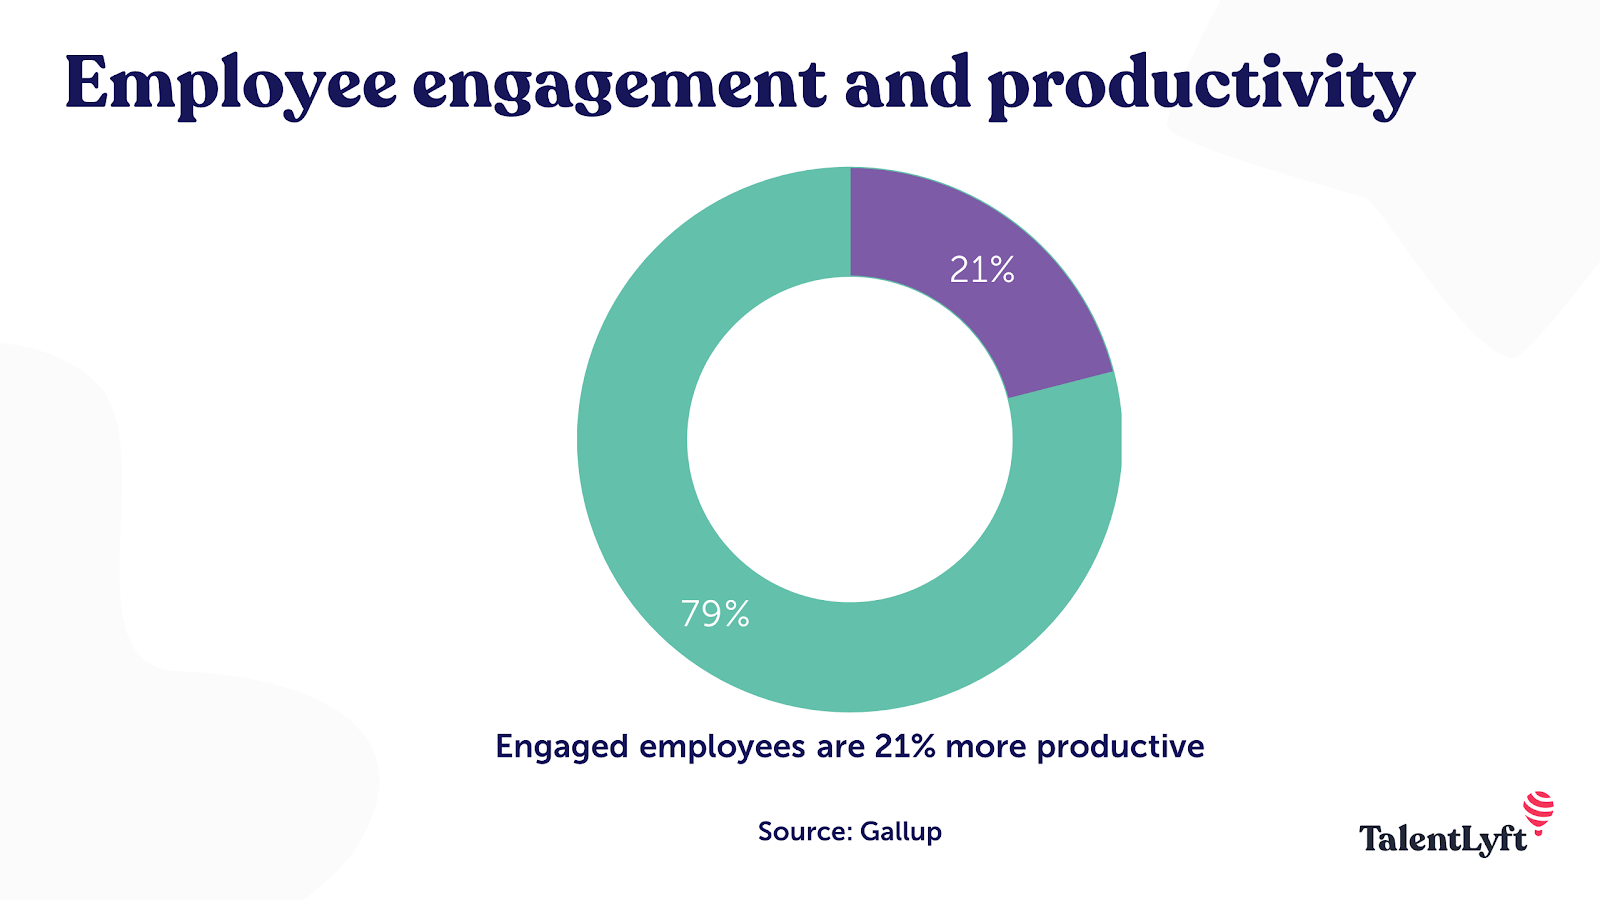 Employee engagement and productivity